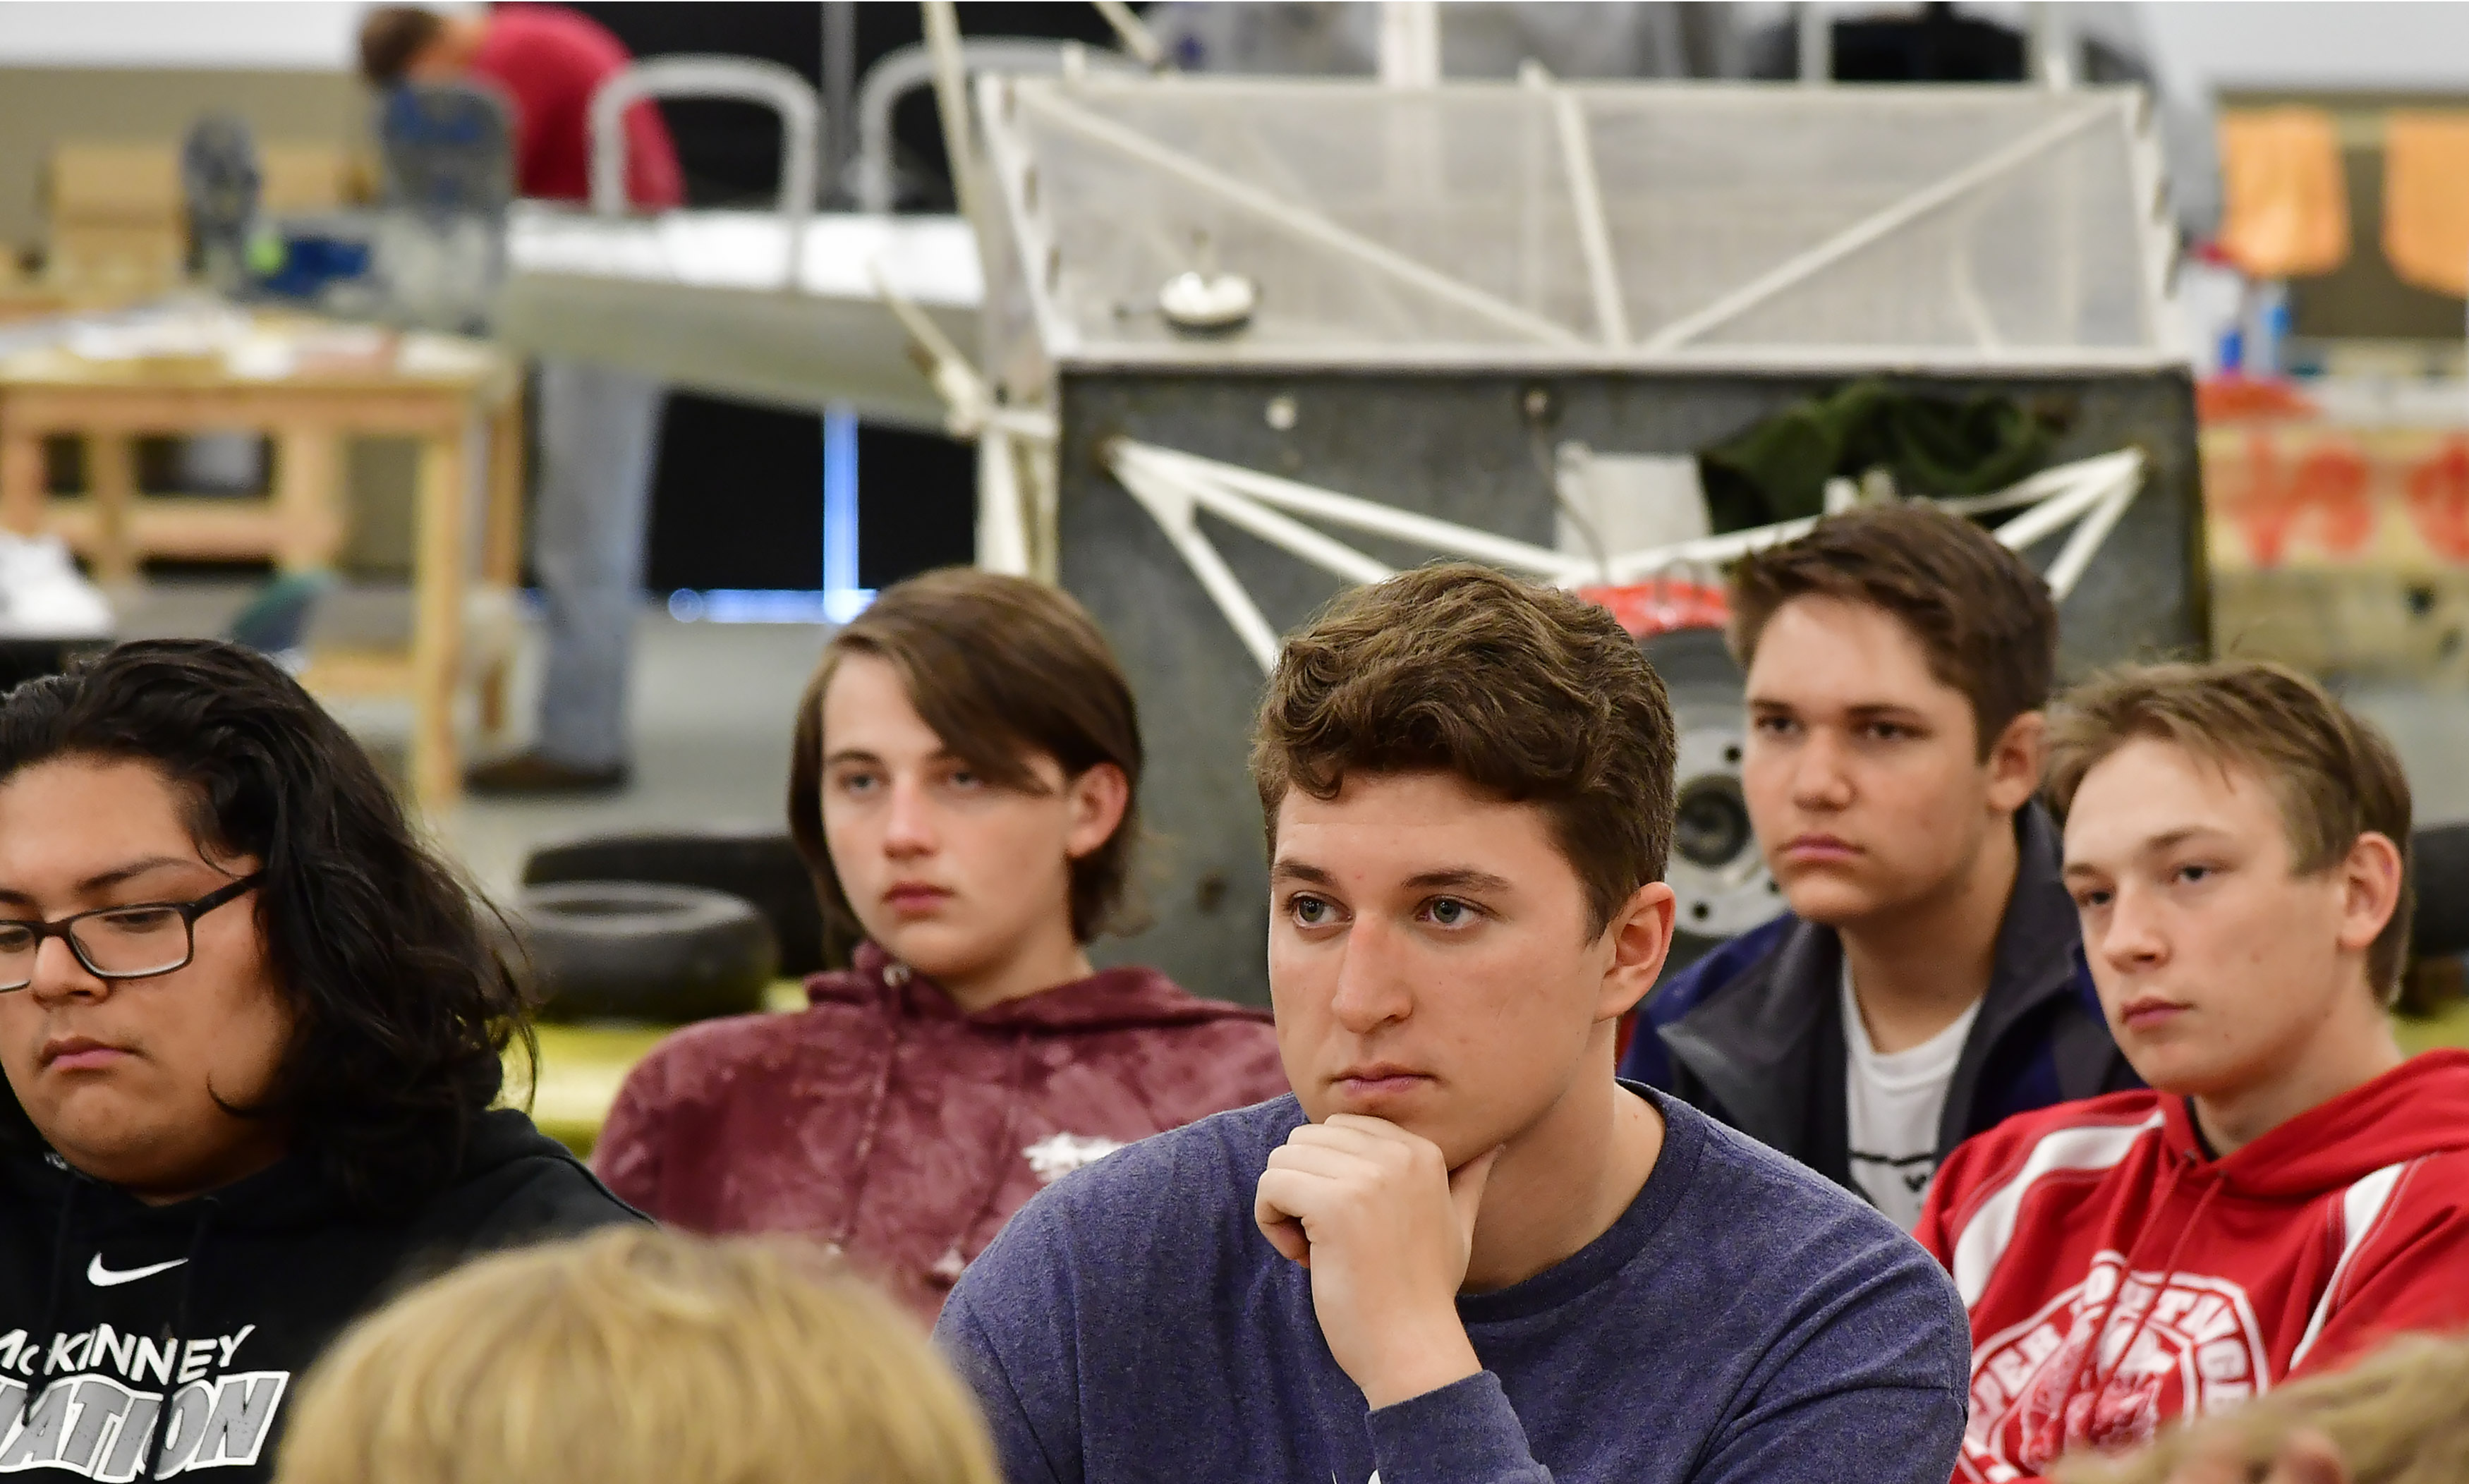 McKinney High School students learn about aviation concepts during class in a hangar at McKinney National Airport in McKinney, Texas, Nov. 8. Photo by David Tulis.